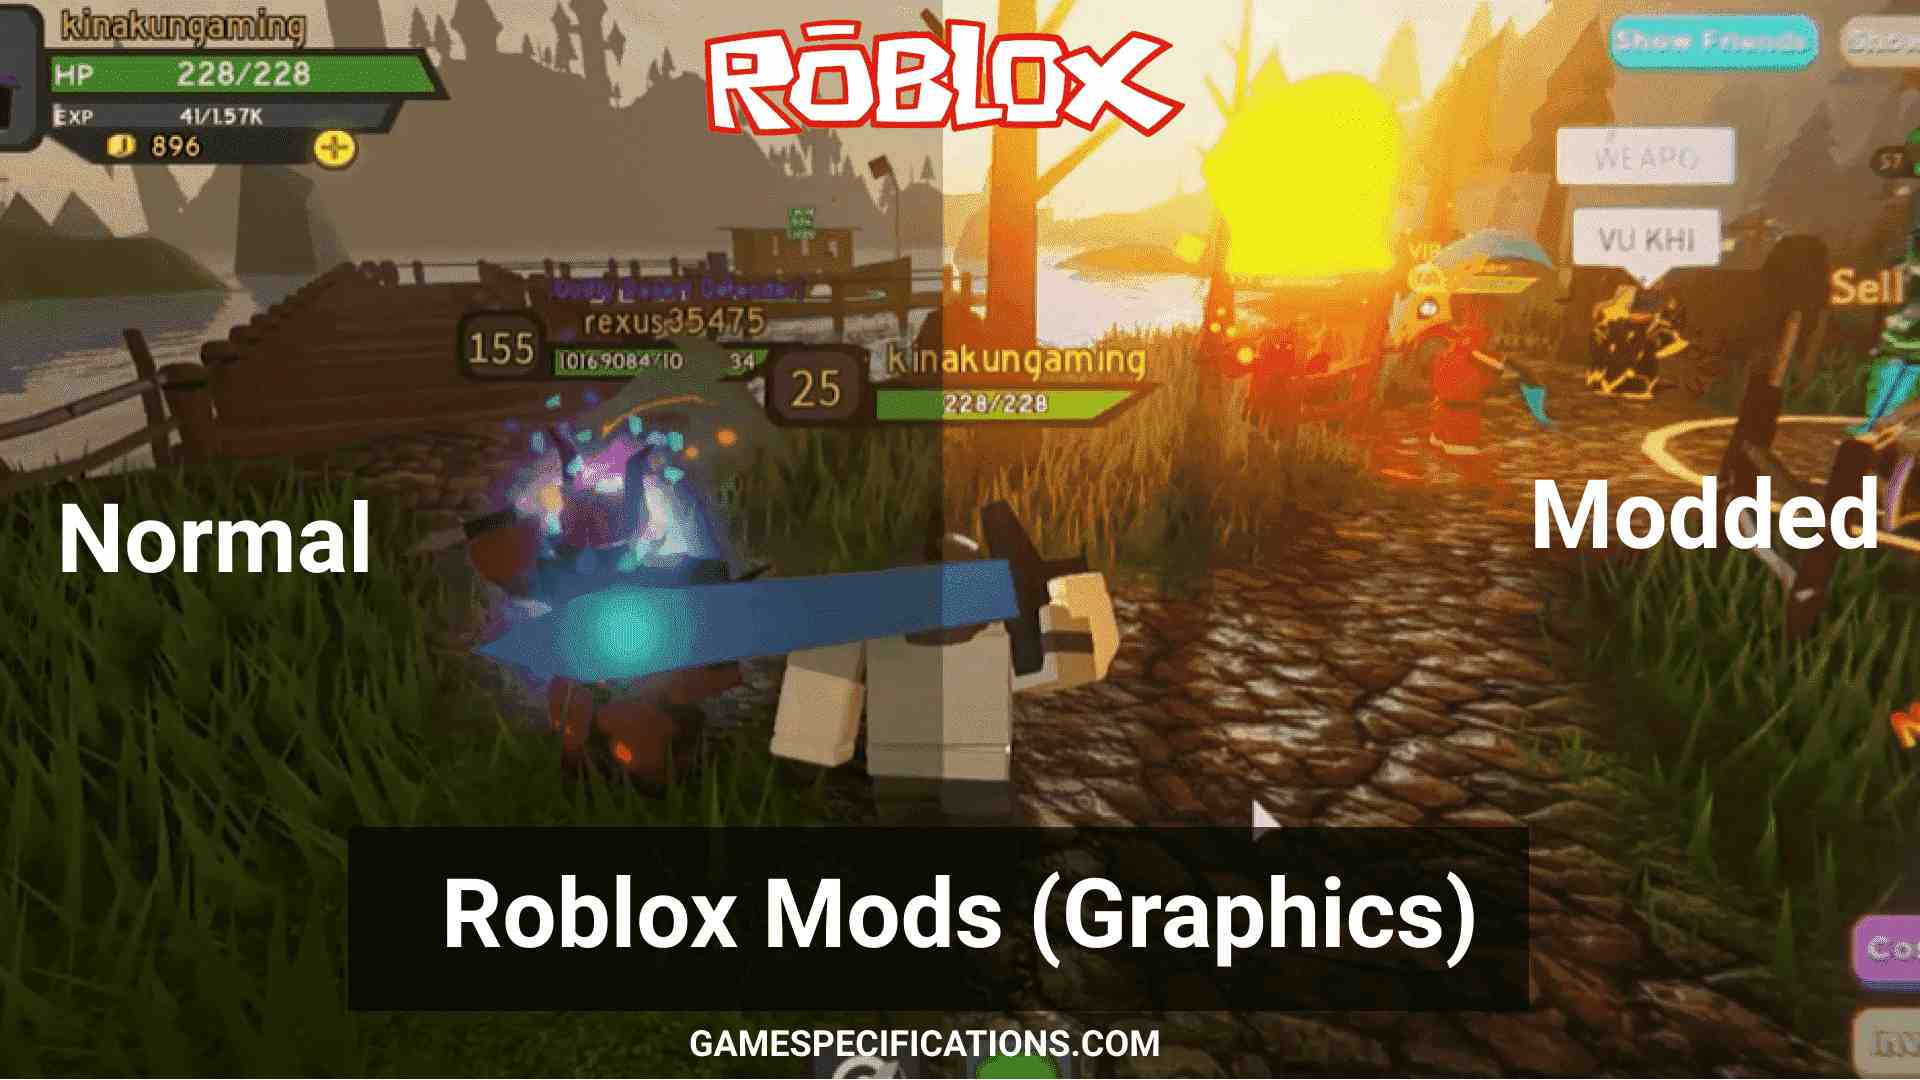 Roblox Mods An Ultimate Boost To Roblox Graphics 2021 Game Specifications - besdt game graphics in roblox